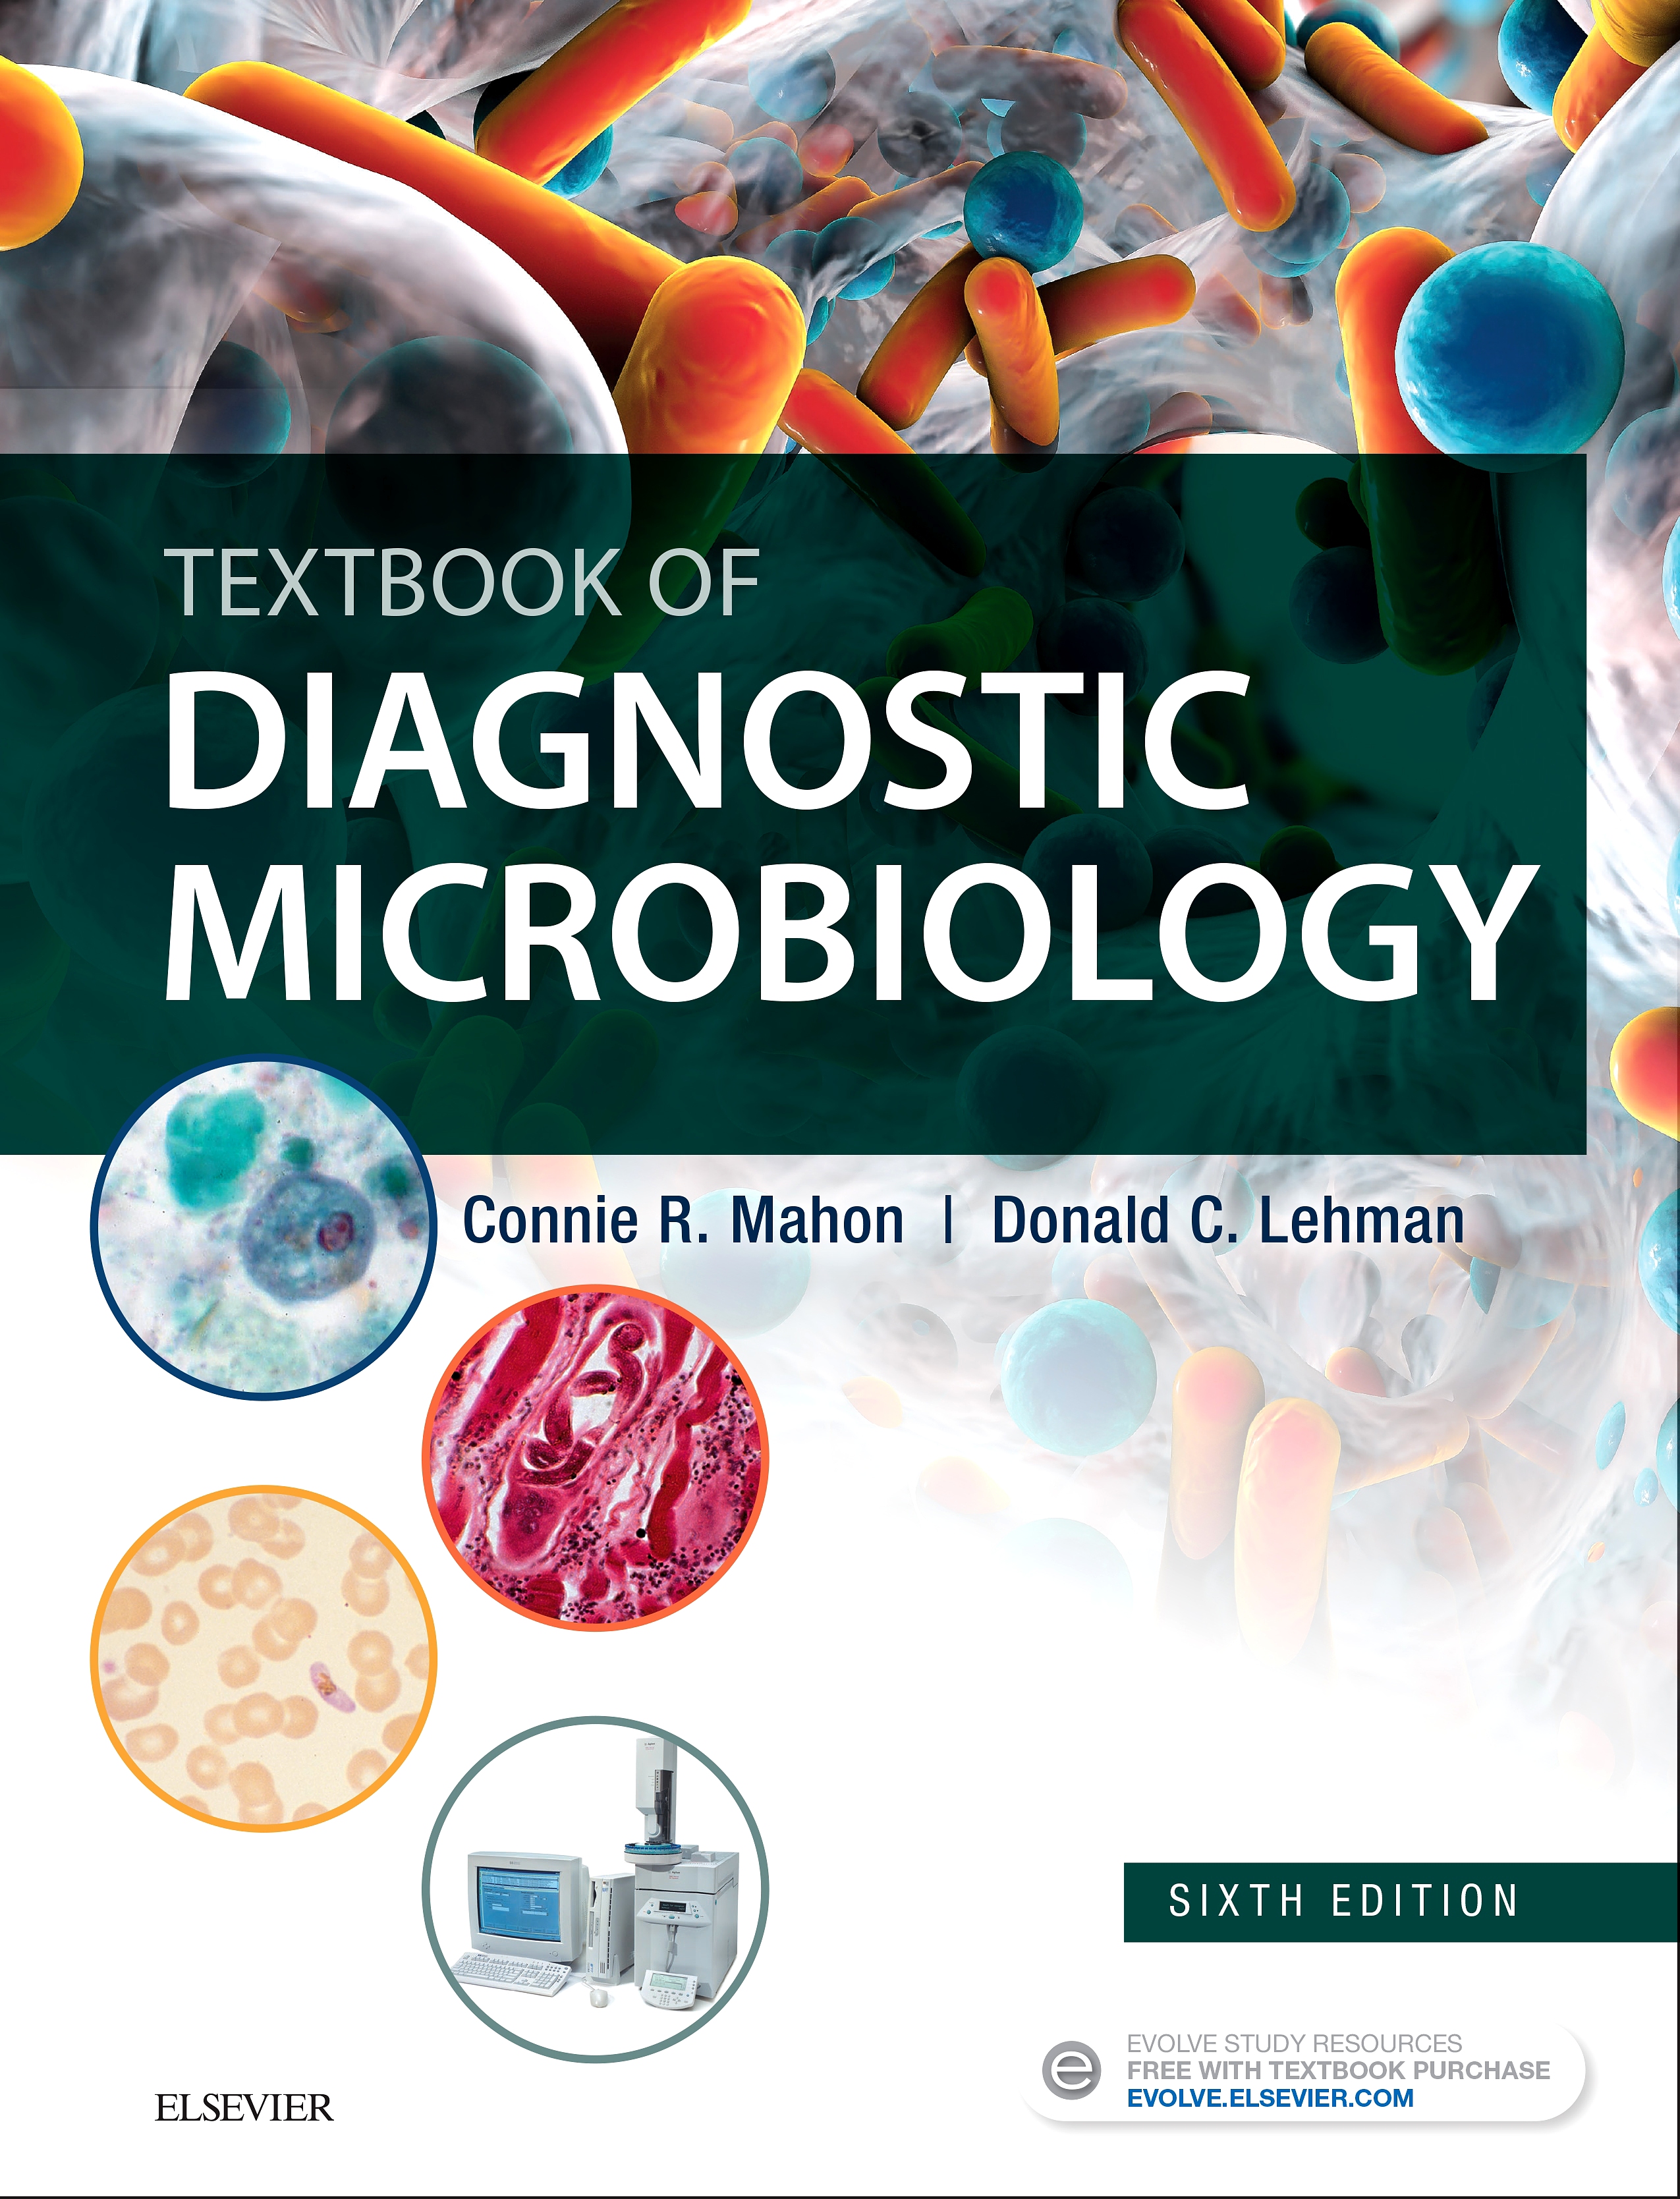 Evolve Resources for Textbook of Diagnostic Microbiology, 6th Edition